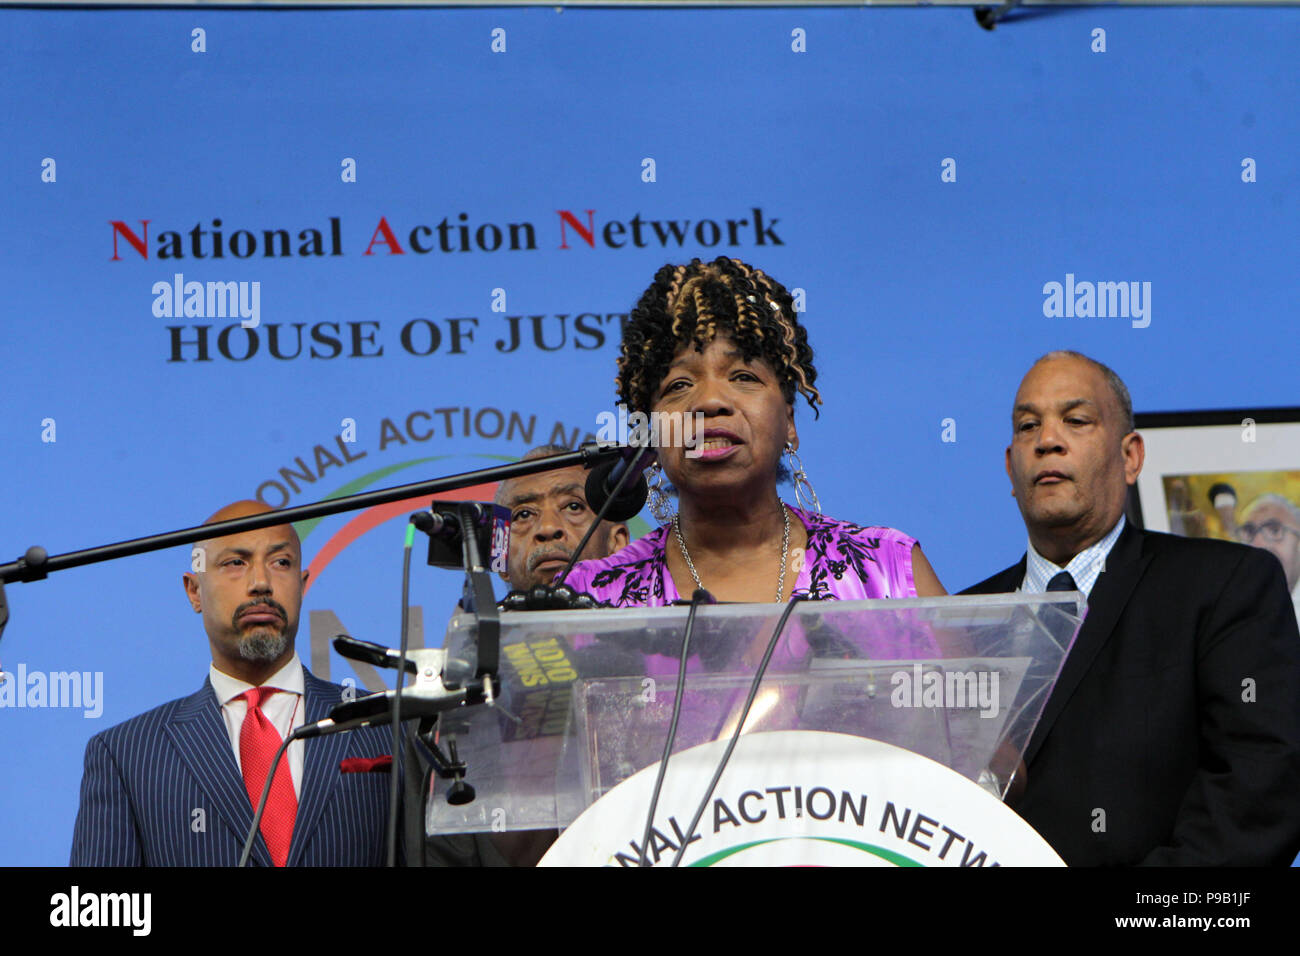 New York, USA. 16th July, 2018.  (L-R) Rev. Kirsten John Foy, Northeast Regional Director, National Action Network, Rev. Al Sharpton, Founder & President, National Action Network, Gwen Carr, Mother of Eric Garner and Attorney Michael Hardy, Co-Founder, National Action Network attend press conference announcing that the NYPD will process with disciplinary action against NYPD Officer Daniel Pantaleo by September in the absence of further action from the DOJ in Eric Garner's case held at the House of Justice in the Harlem section of New York City. Credit: MediaPunch Inc/Alamy Live News Stock Photo